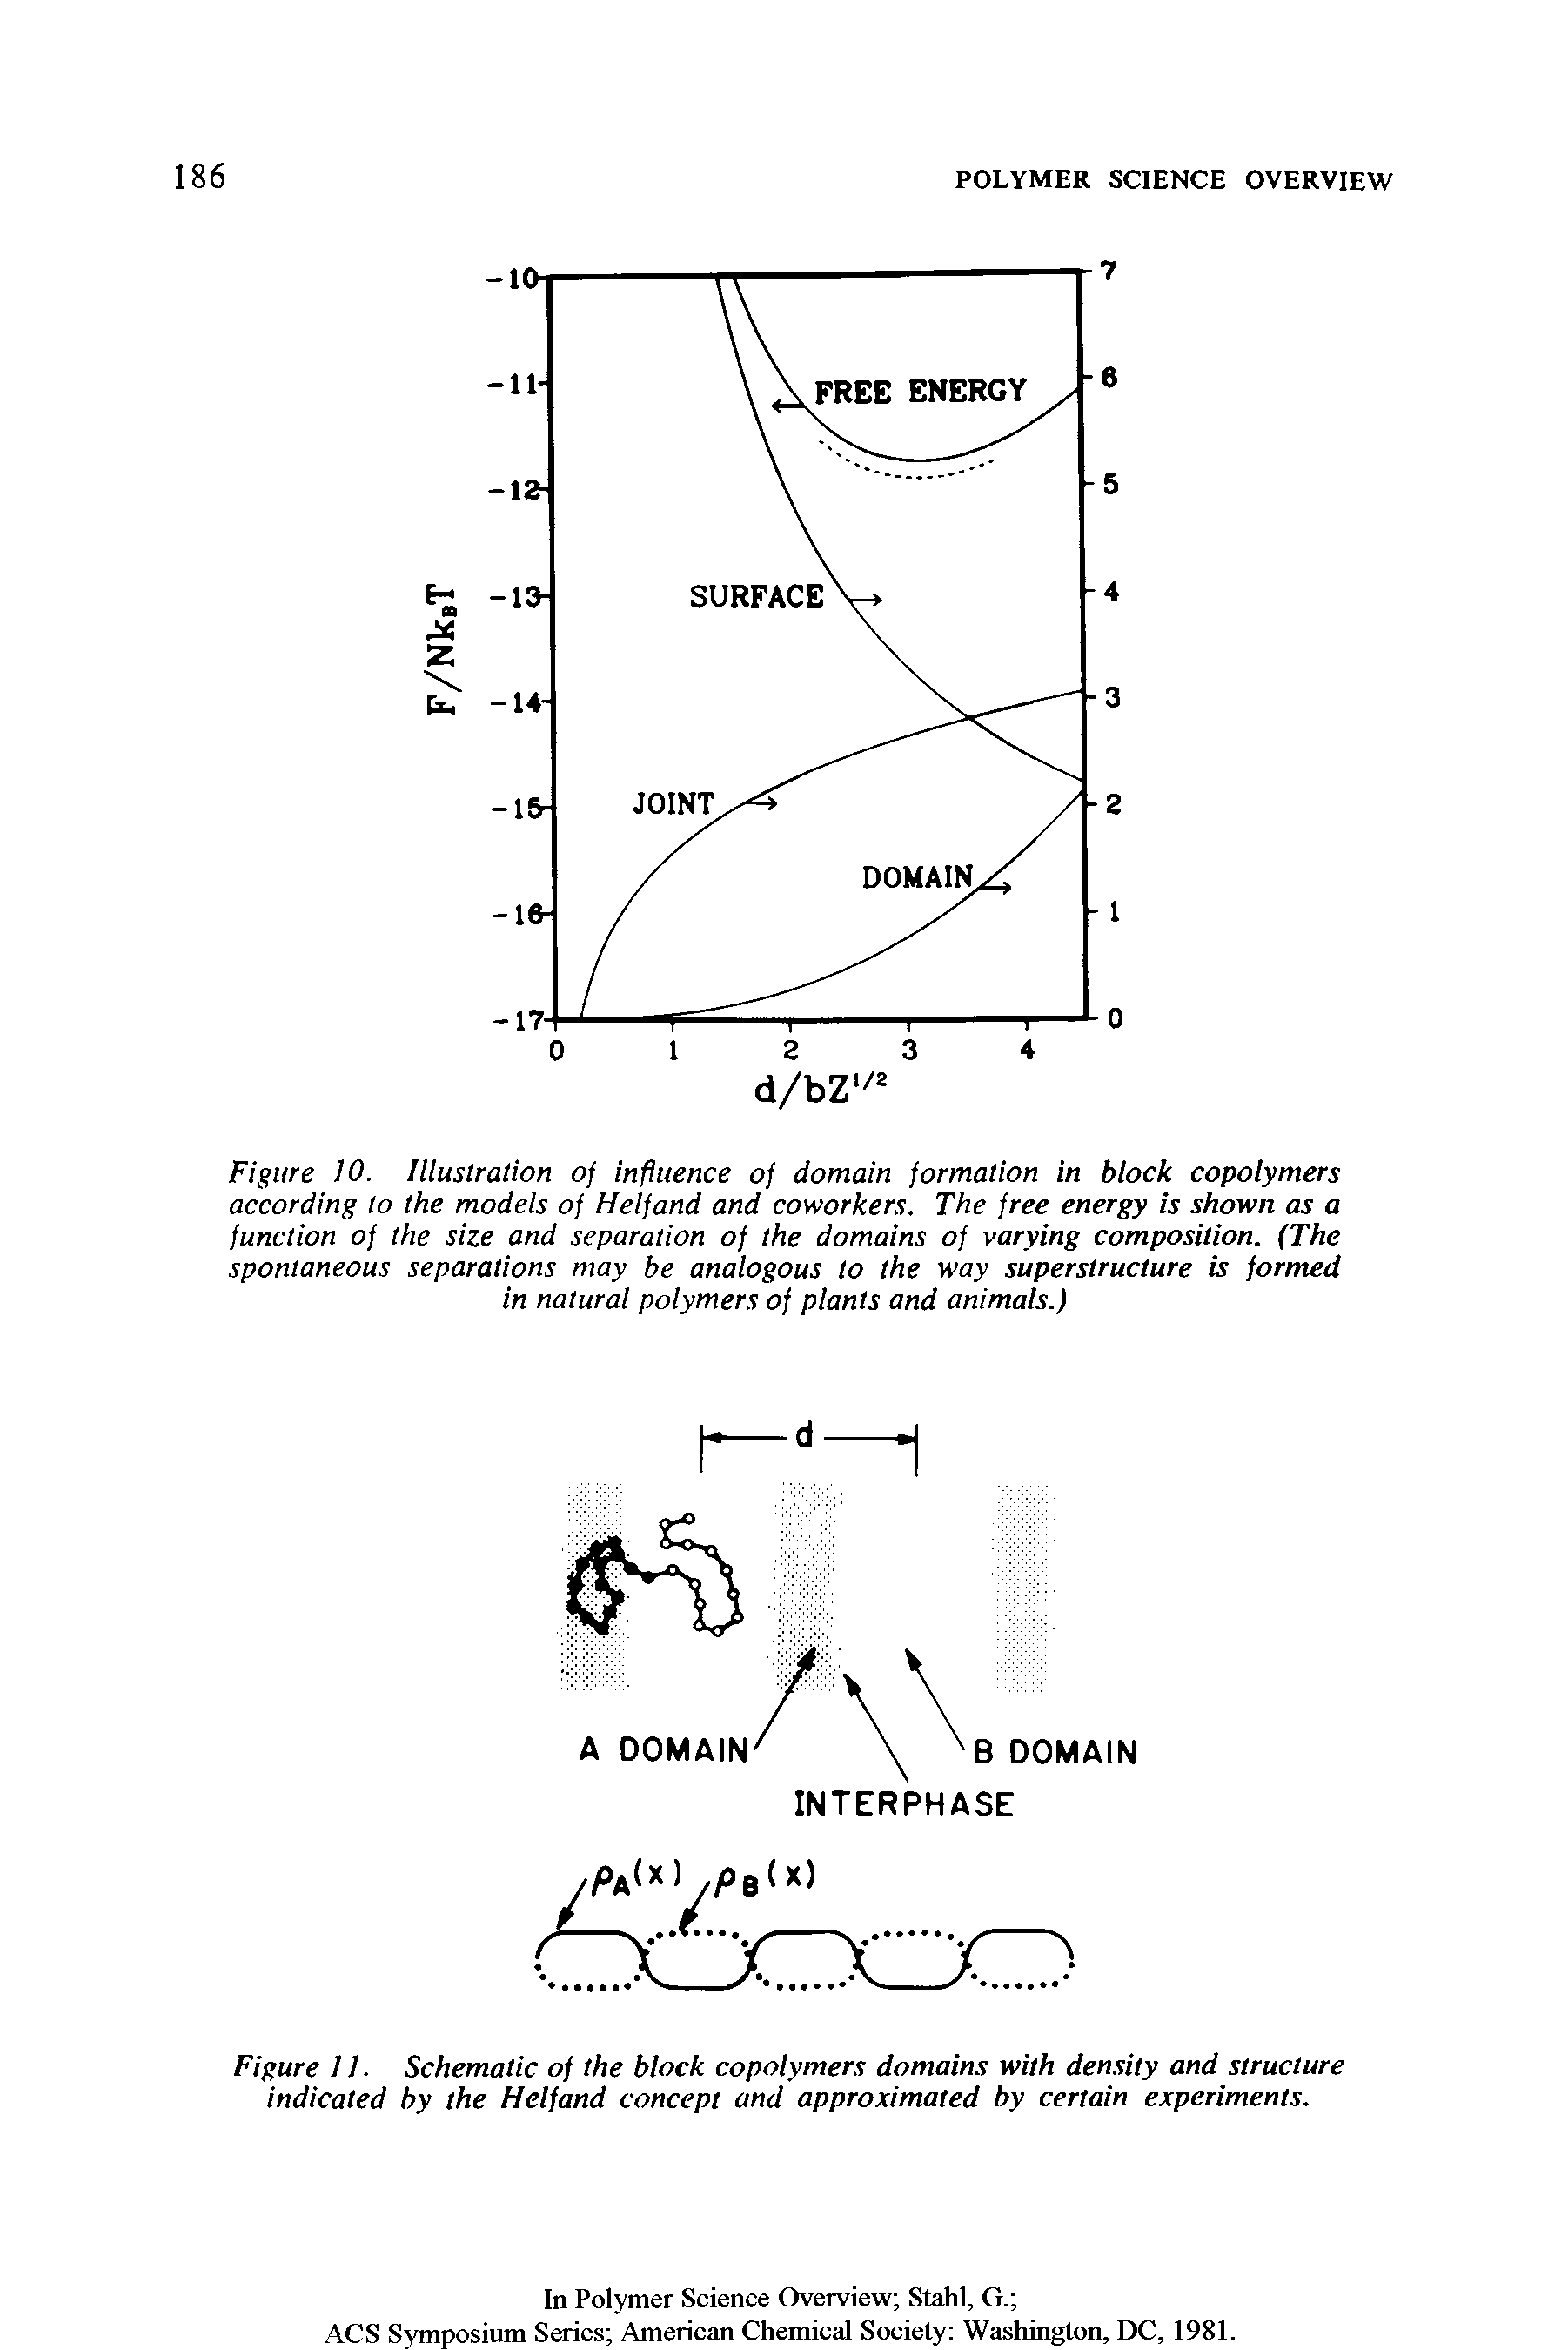 Figure 10. Illustration of influence of domain formation in block copolymers according to the models of Helfand and coworkers. The free energy is shown as a function of the size and separation of the domains of varying composition. (The spontaneous separations may be analogous to the way superstructure is formed in natural polymers of plants and animals.)...